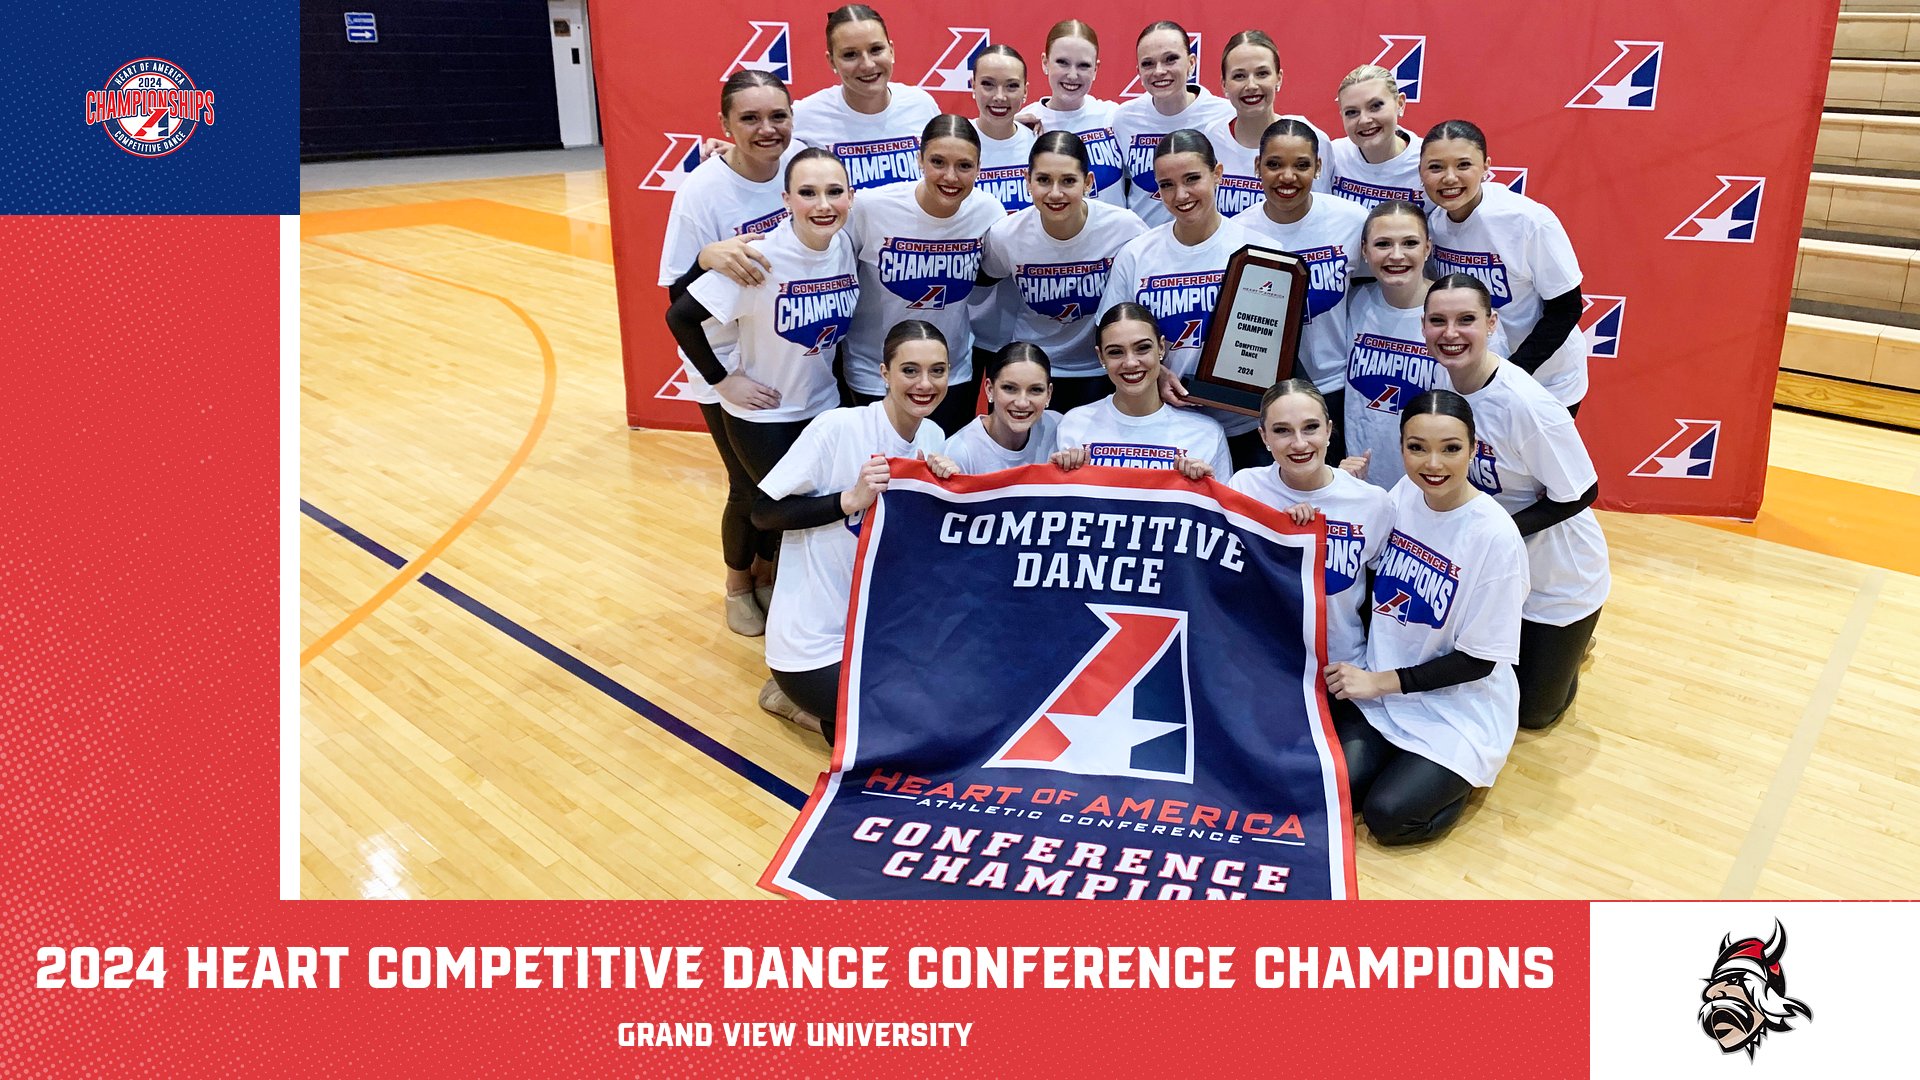 Grand View Wins 2024 Heart Competitive Dance Conference Championship